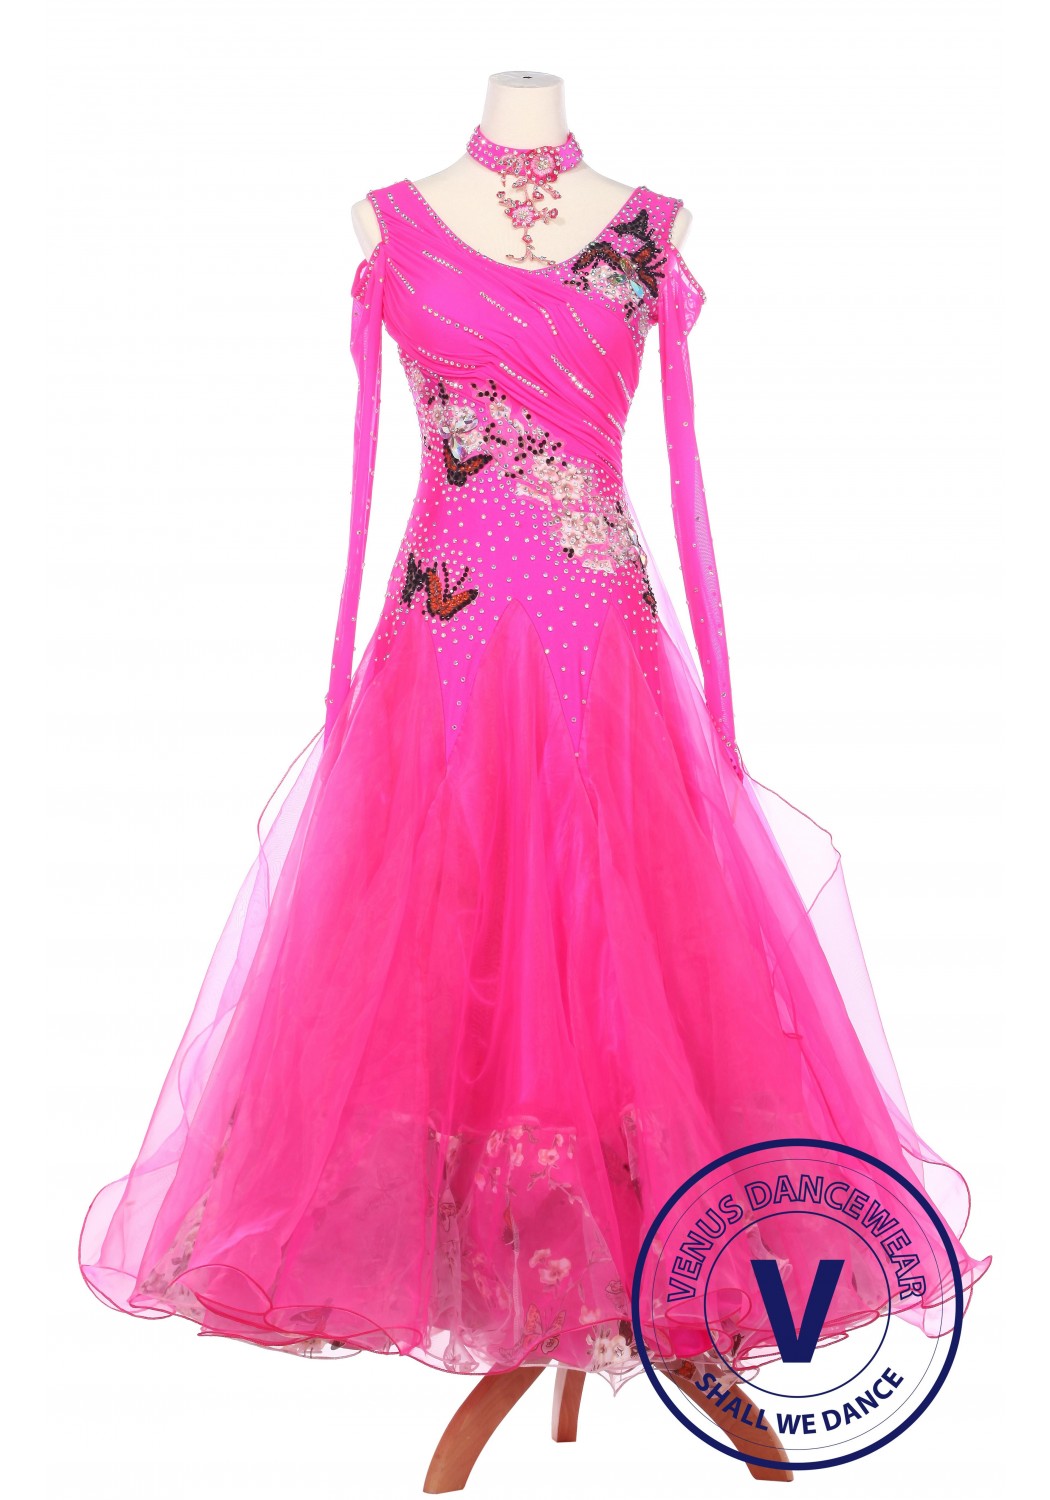 Pink Butterfly Lady Smooth Foxtrot Waltz Standard Competition Ballroom Dress 